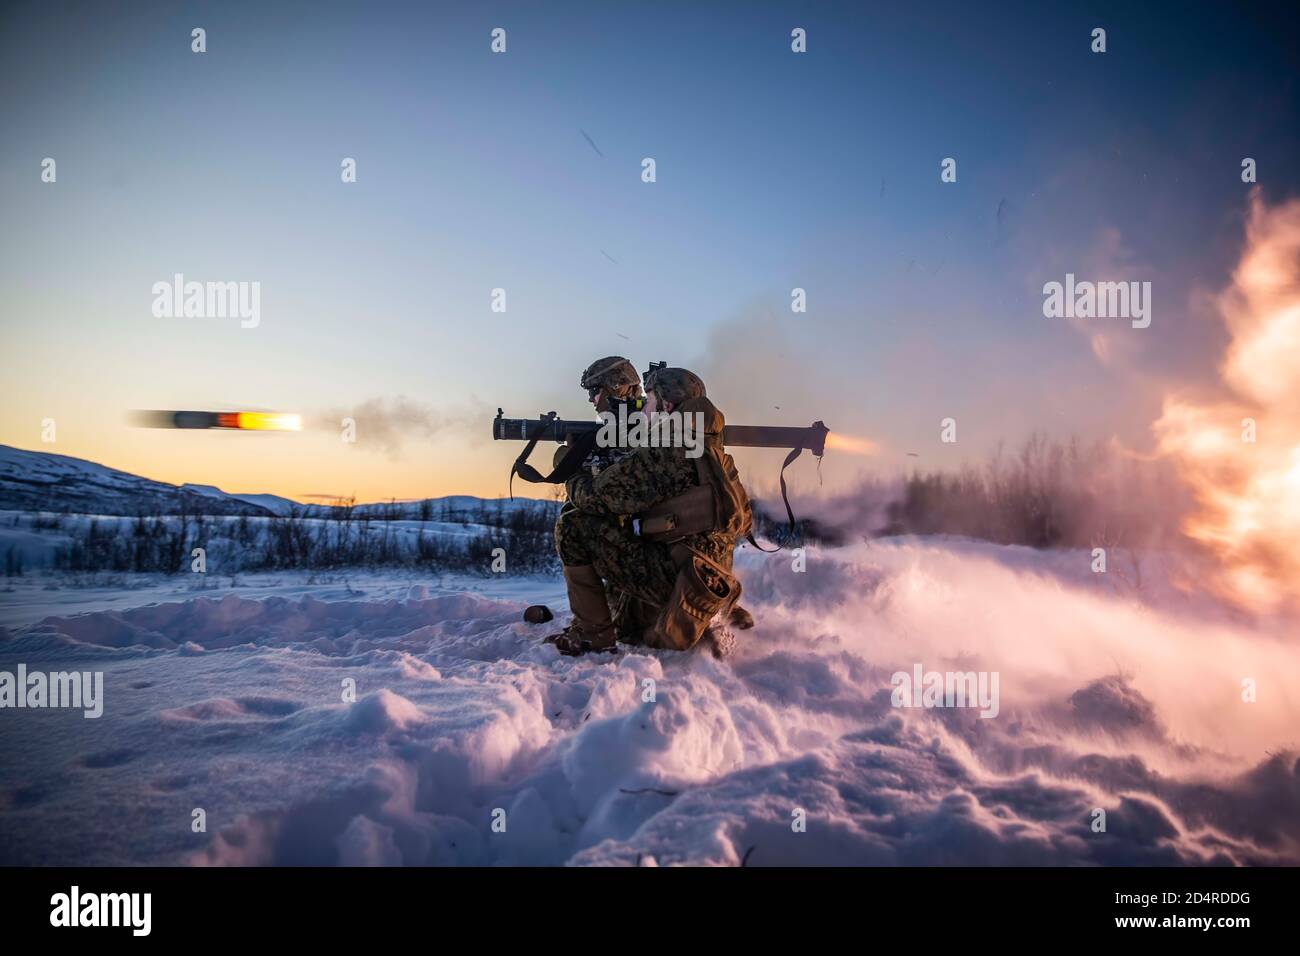 A U.S. Marine with Marine Rotational Force-Europe 20.1, Marine Forces Europe and Africa, fires a Shoulder-Launched Multipurpose Assault Weapon during a live-fire range in Setermoen, Norway, Nov. 6, 2019. MRF-E focuses on regional engagements throughout Europe by conducting various exercises, arctic cold-weather and mountain-warfare training, and military-to-military engagements, which enhance overall interoperability of the U.S. Marine Corps with allies and partners. (U.S. Marine Corps photo by Lance Cpl. Nathaniel Q. Hamilton) Stock Photo